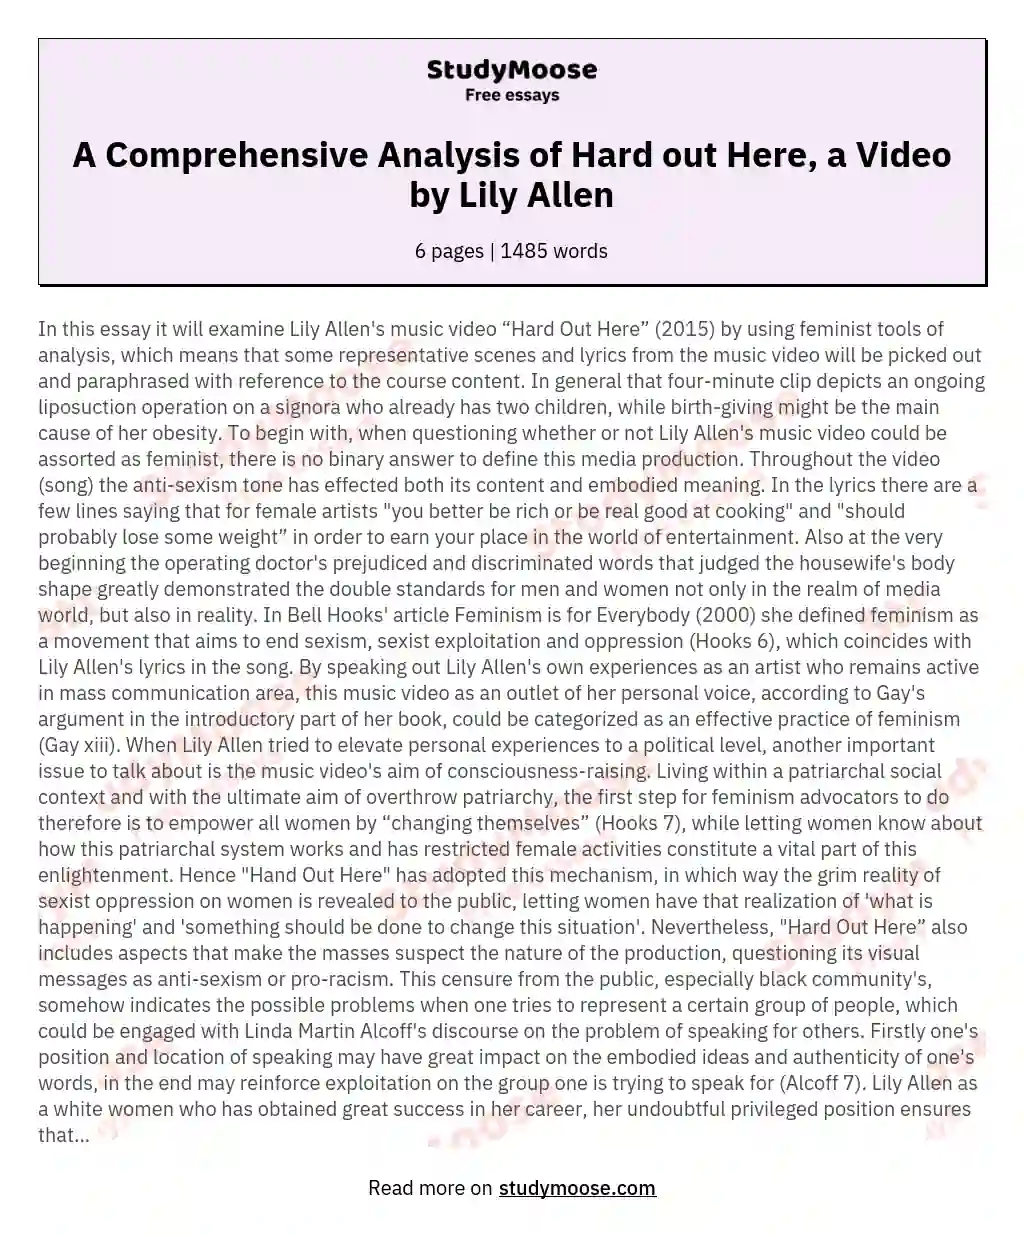 A Comprehensive Analysis of Hard out Here, a Video by Lily Allen essay